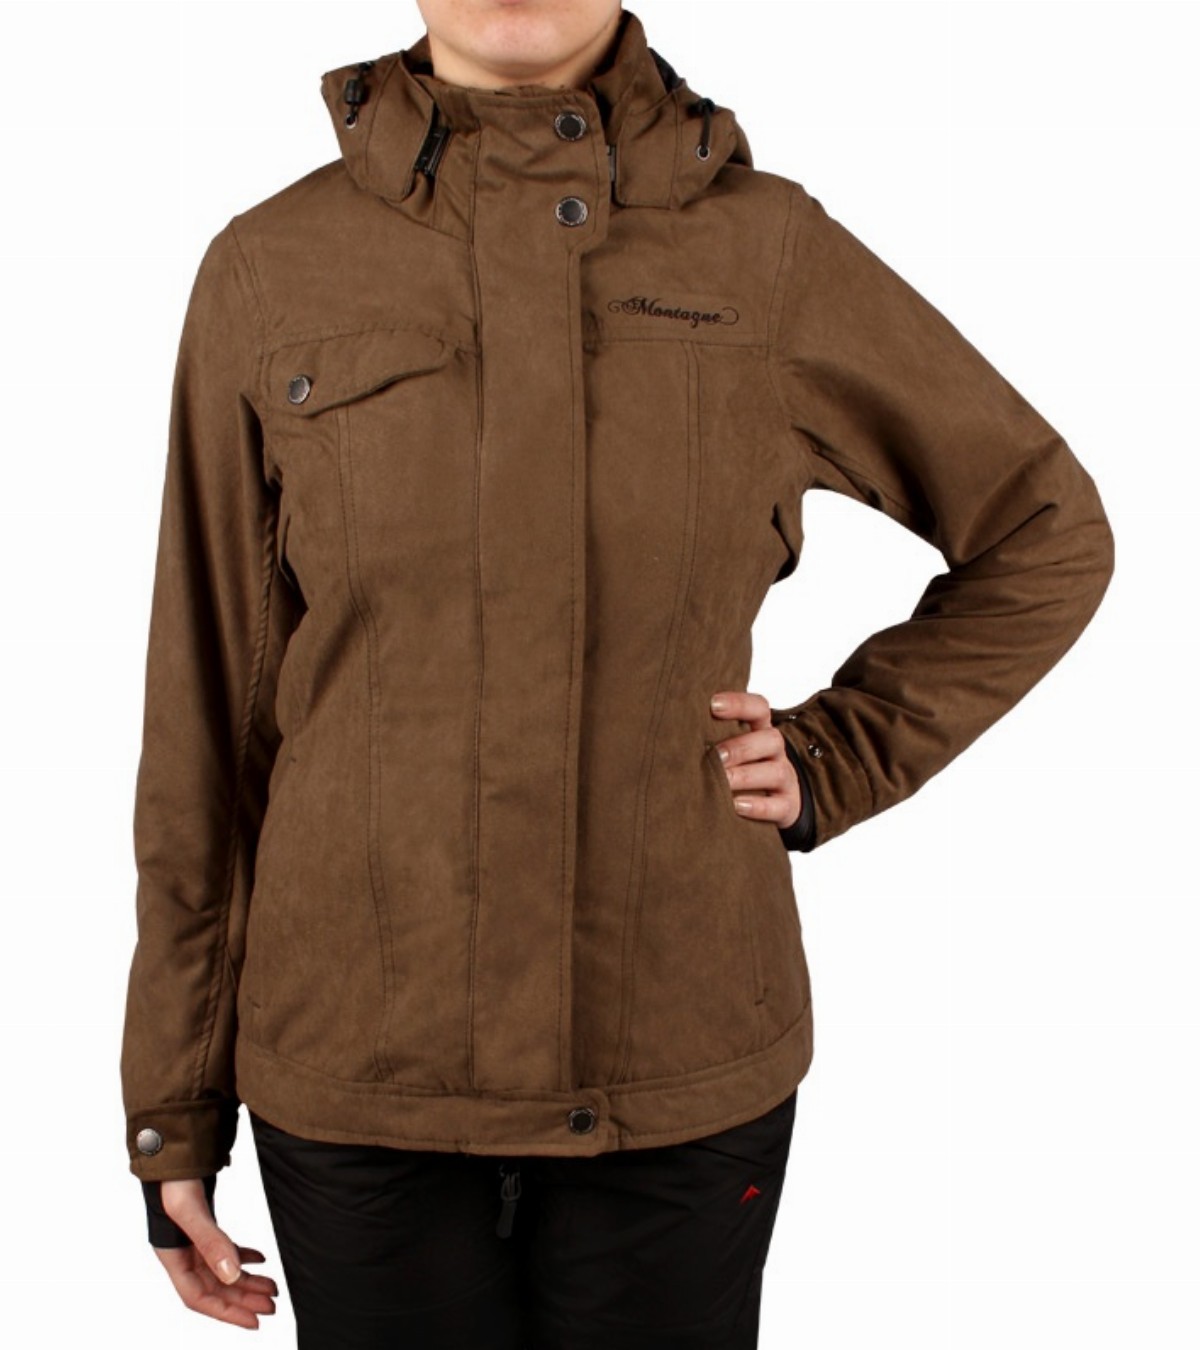 Campera impermeable de mujer Cleo